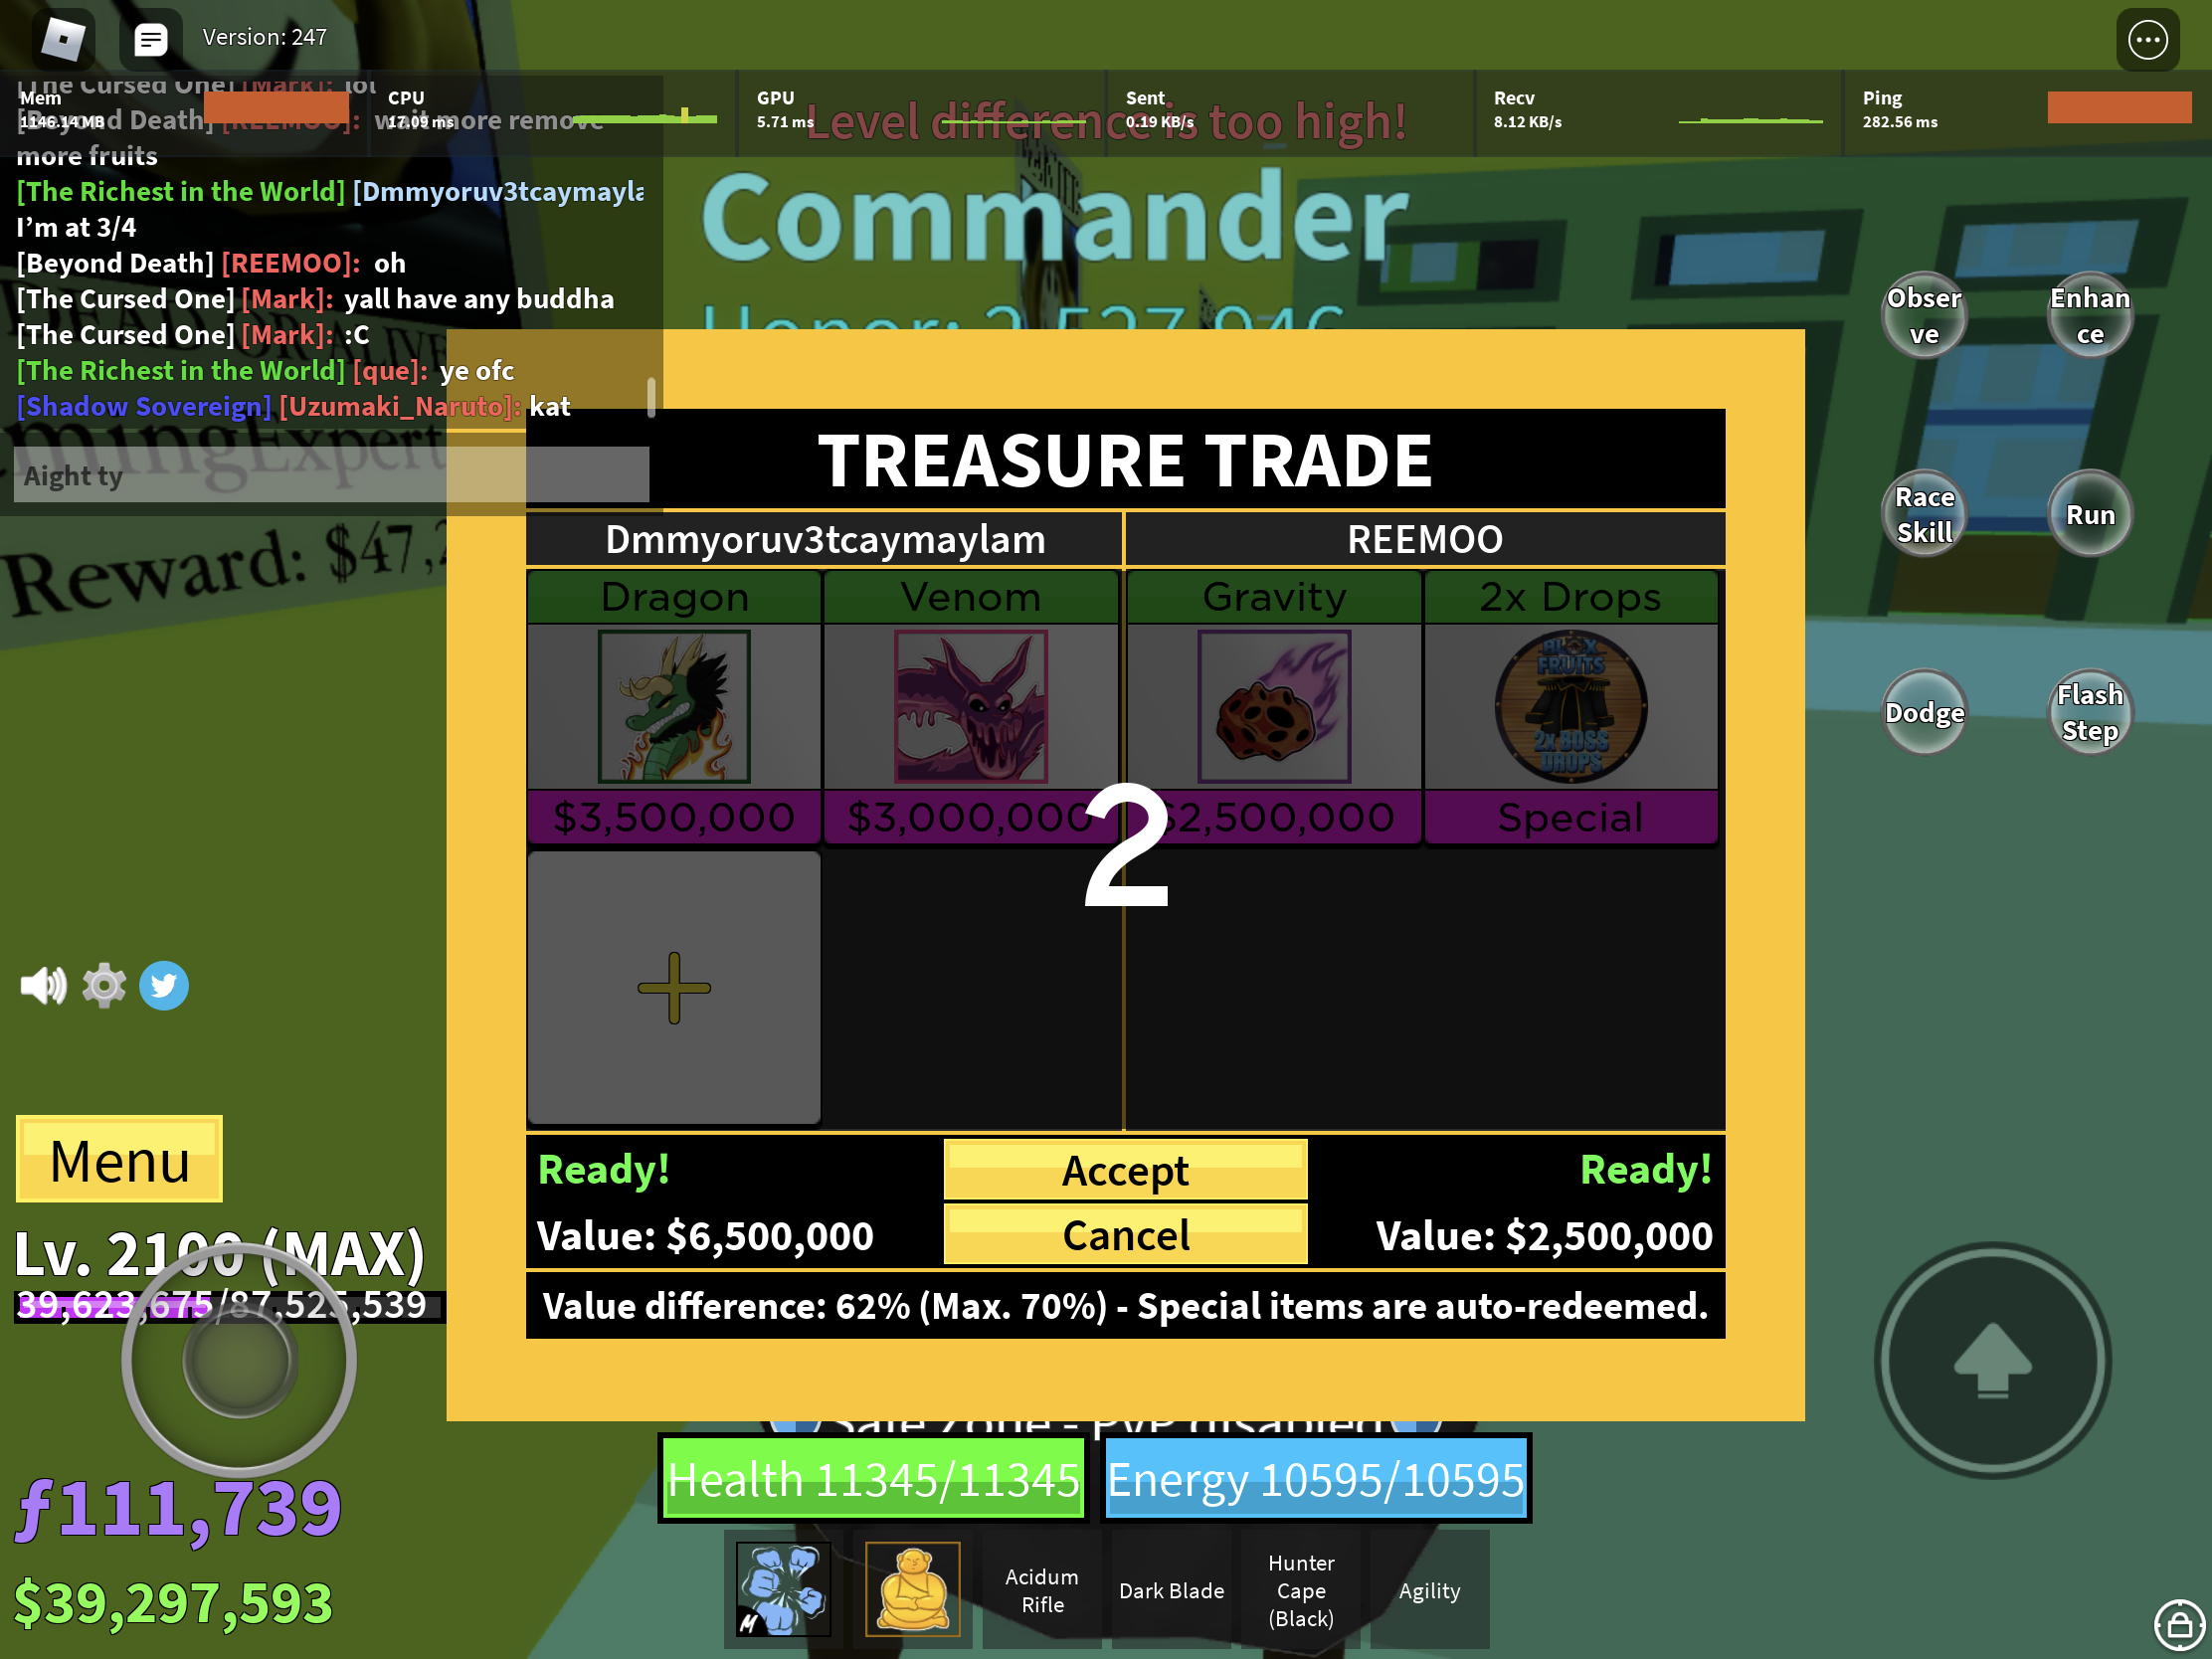 What People Trade For Blizzard? Trading Blizzard in Blox Fruits